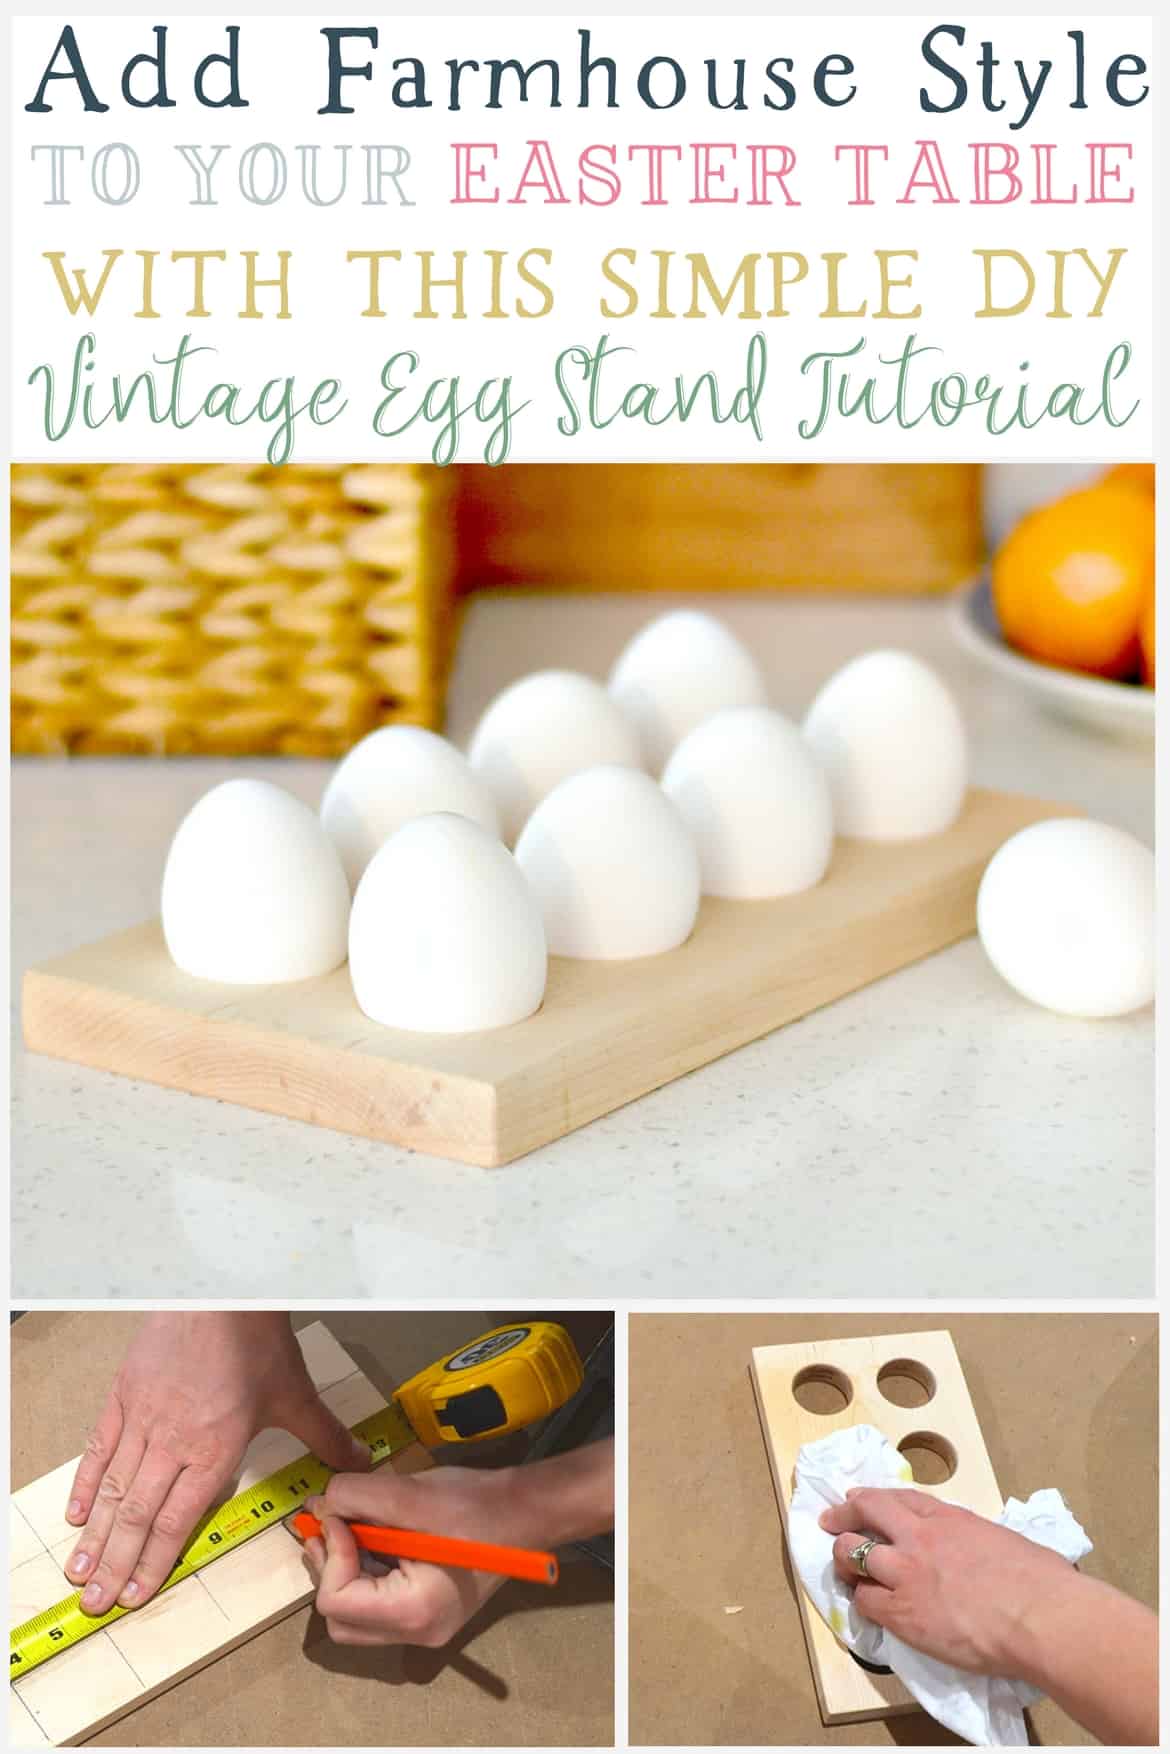 Add Farmhouse Style To Your Table With This Simple Vintage Egg